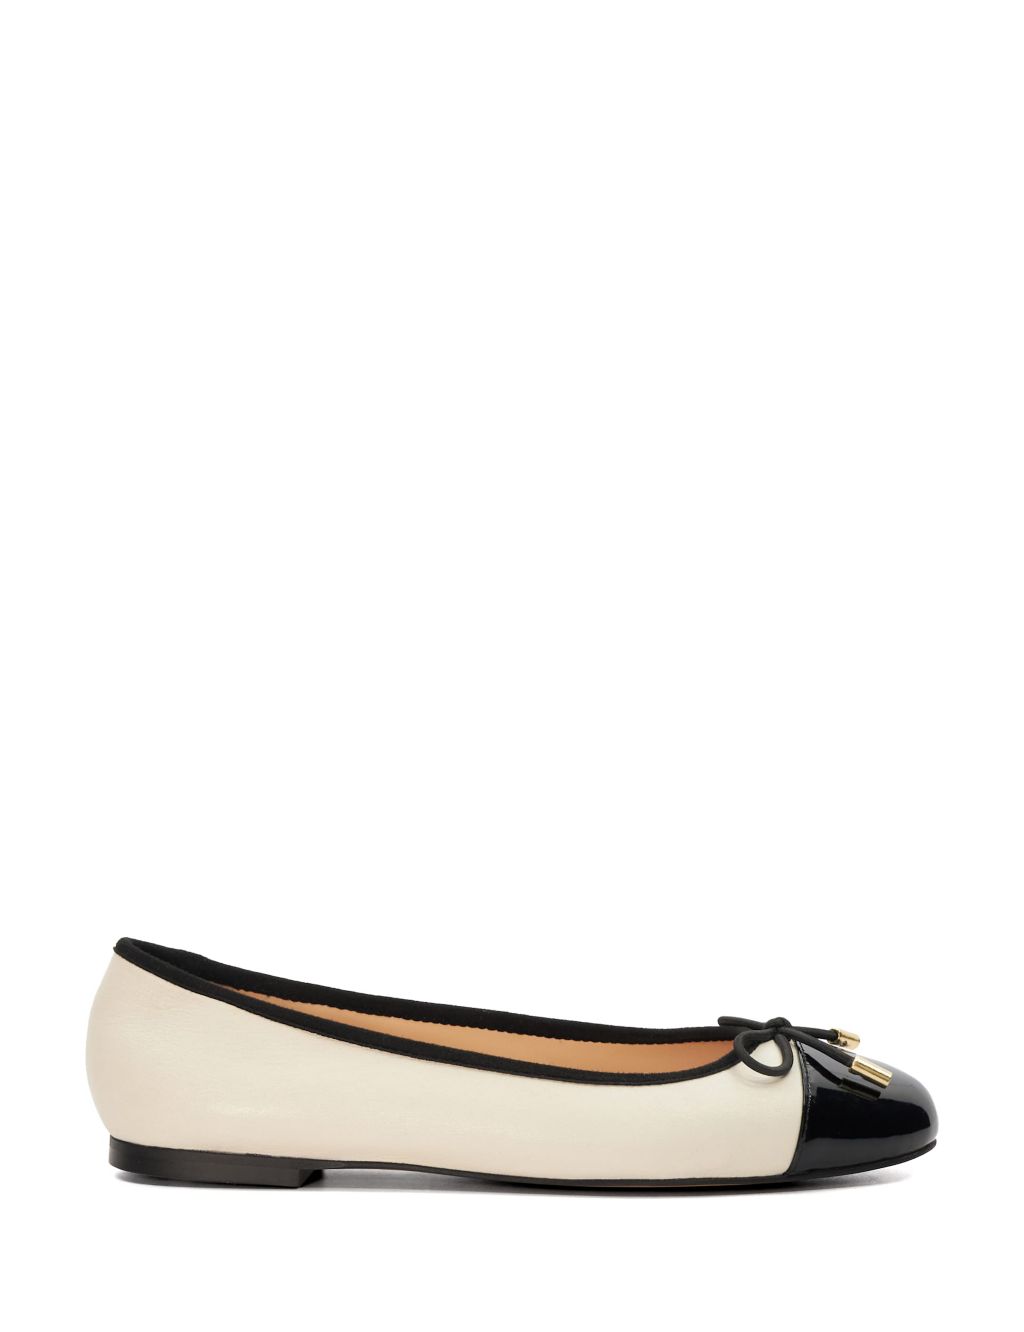 Leather Bow Slip On Flat Ballet Pumps 3 of 5